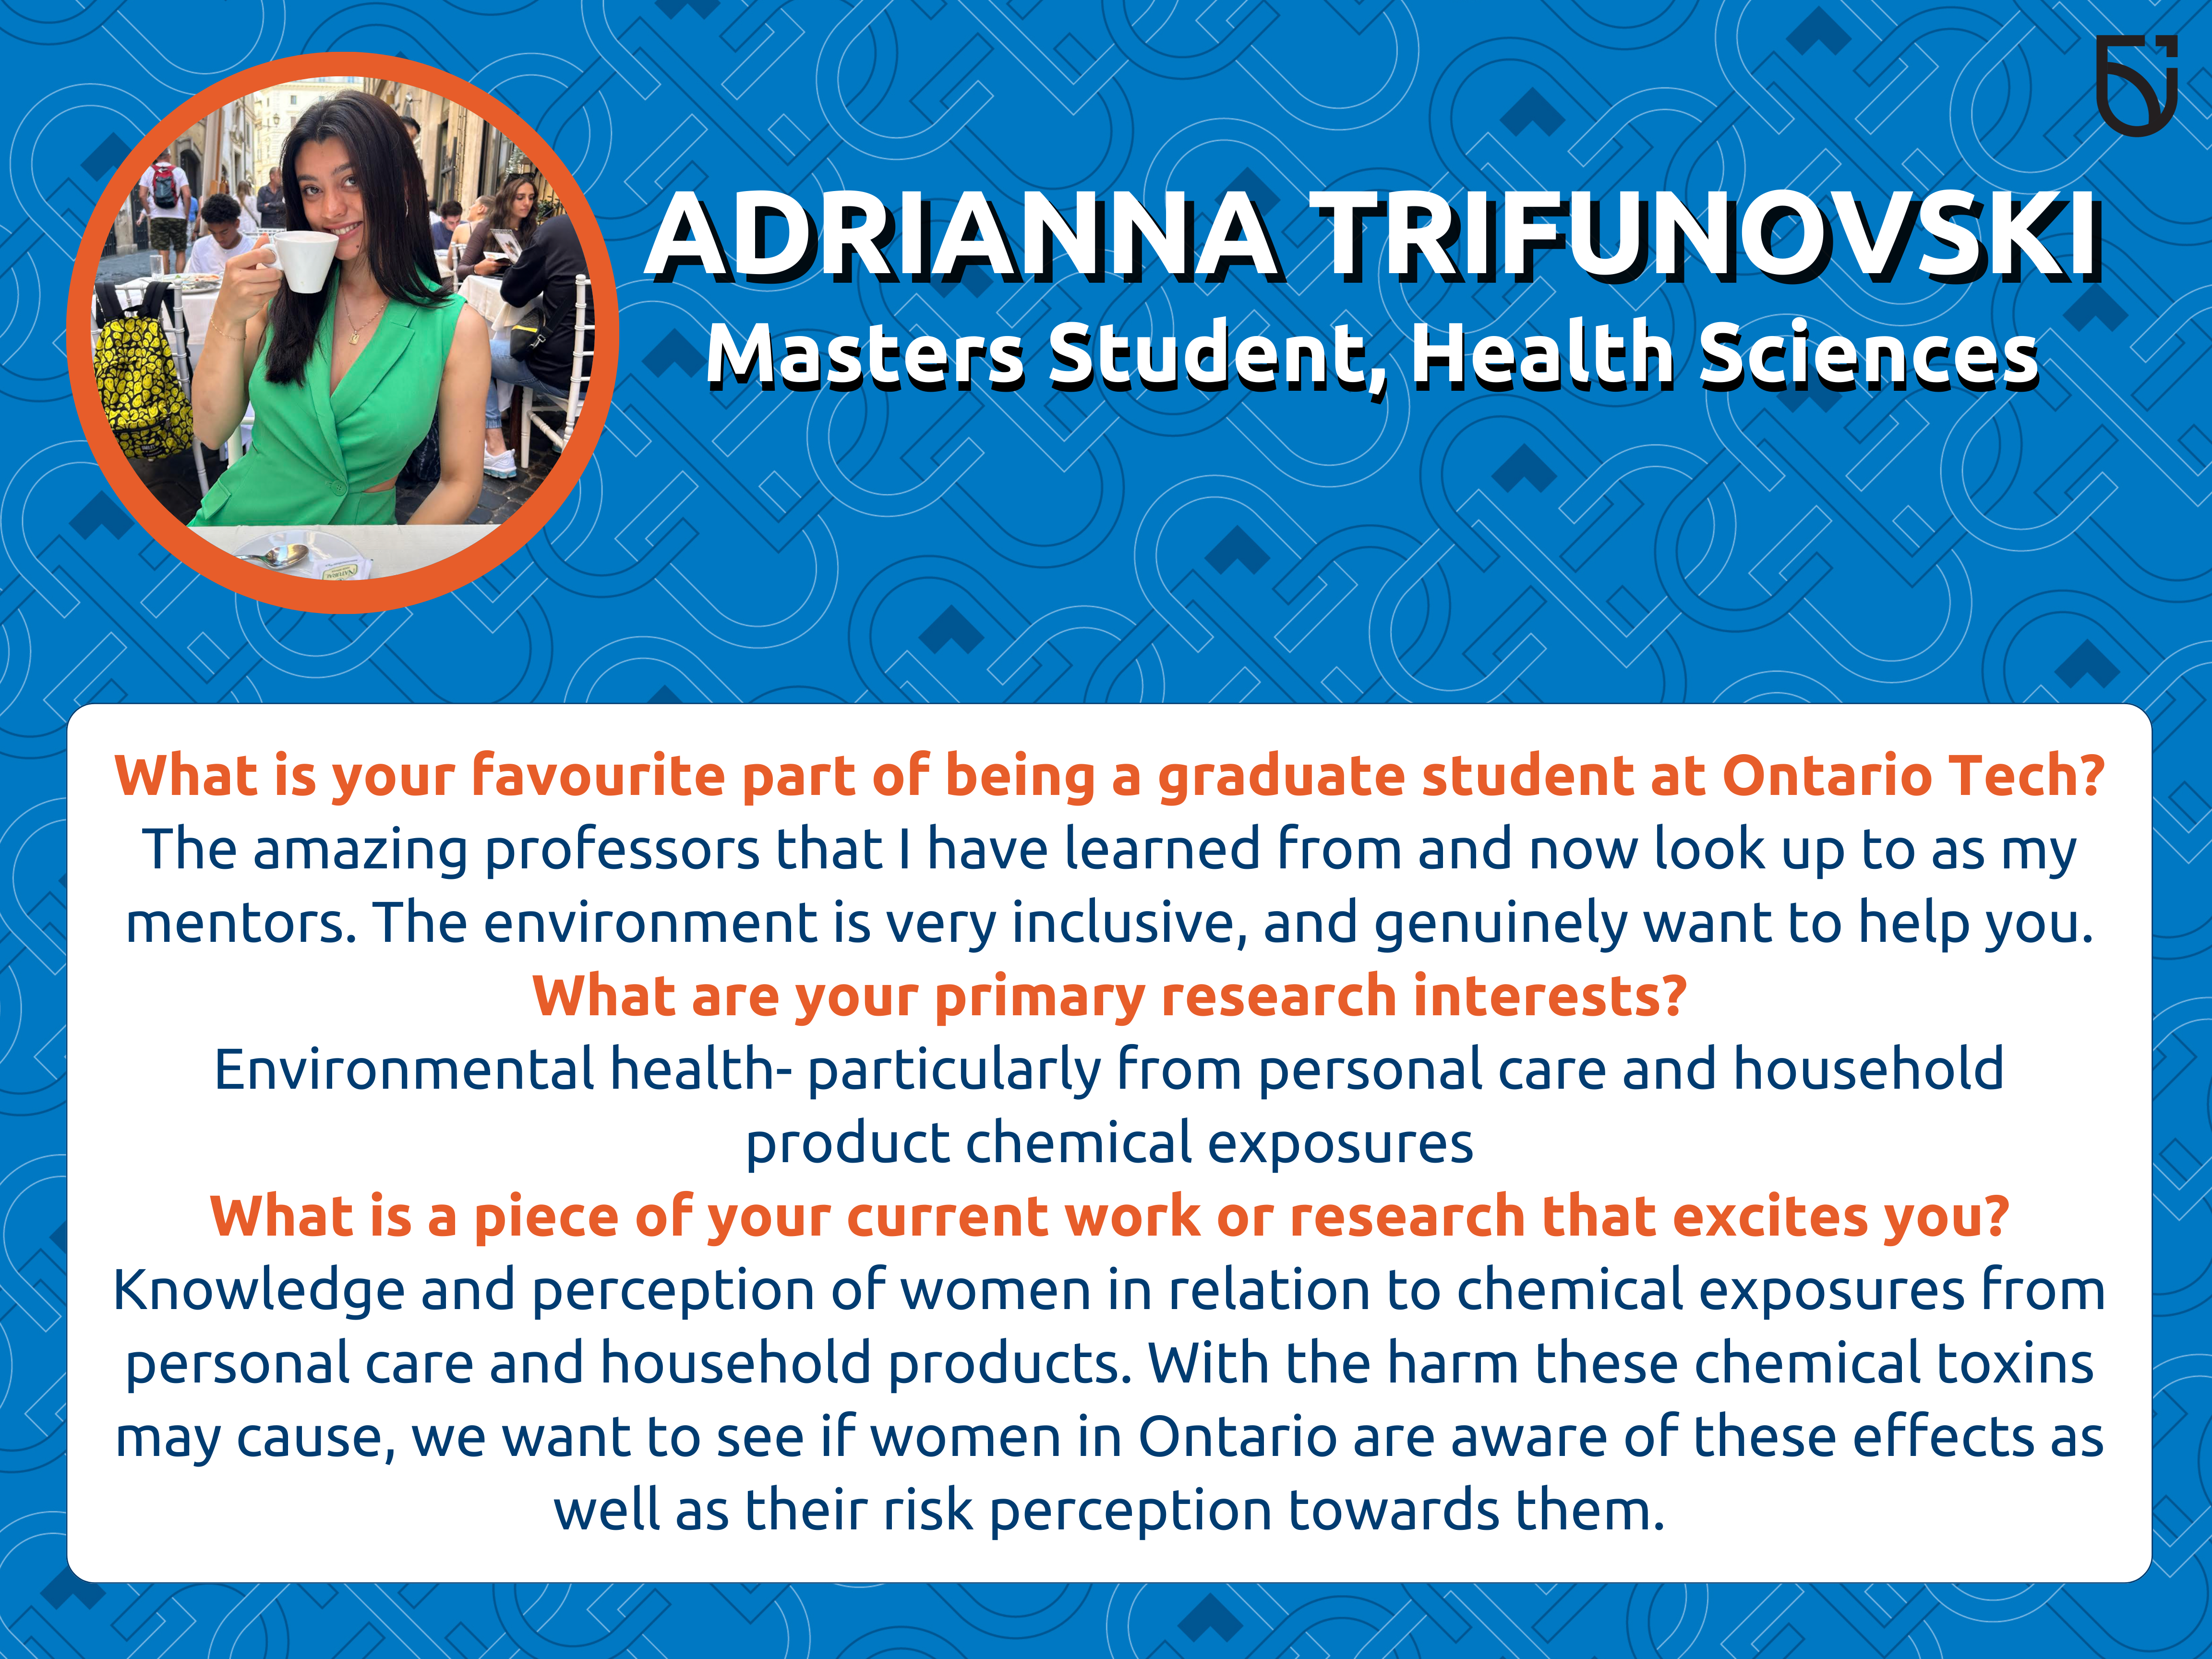 This photo is a Women’s Wednesday feature of Adrianna Trifunovski, a Masters Student in the Faculty of Health Sciences